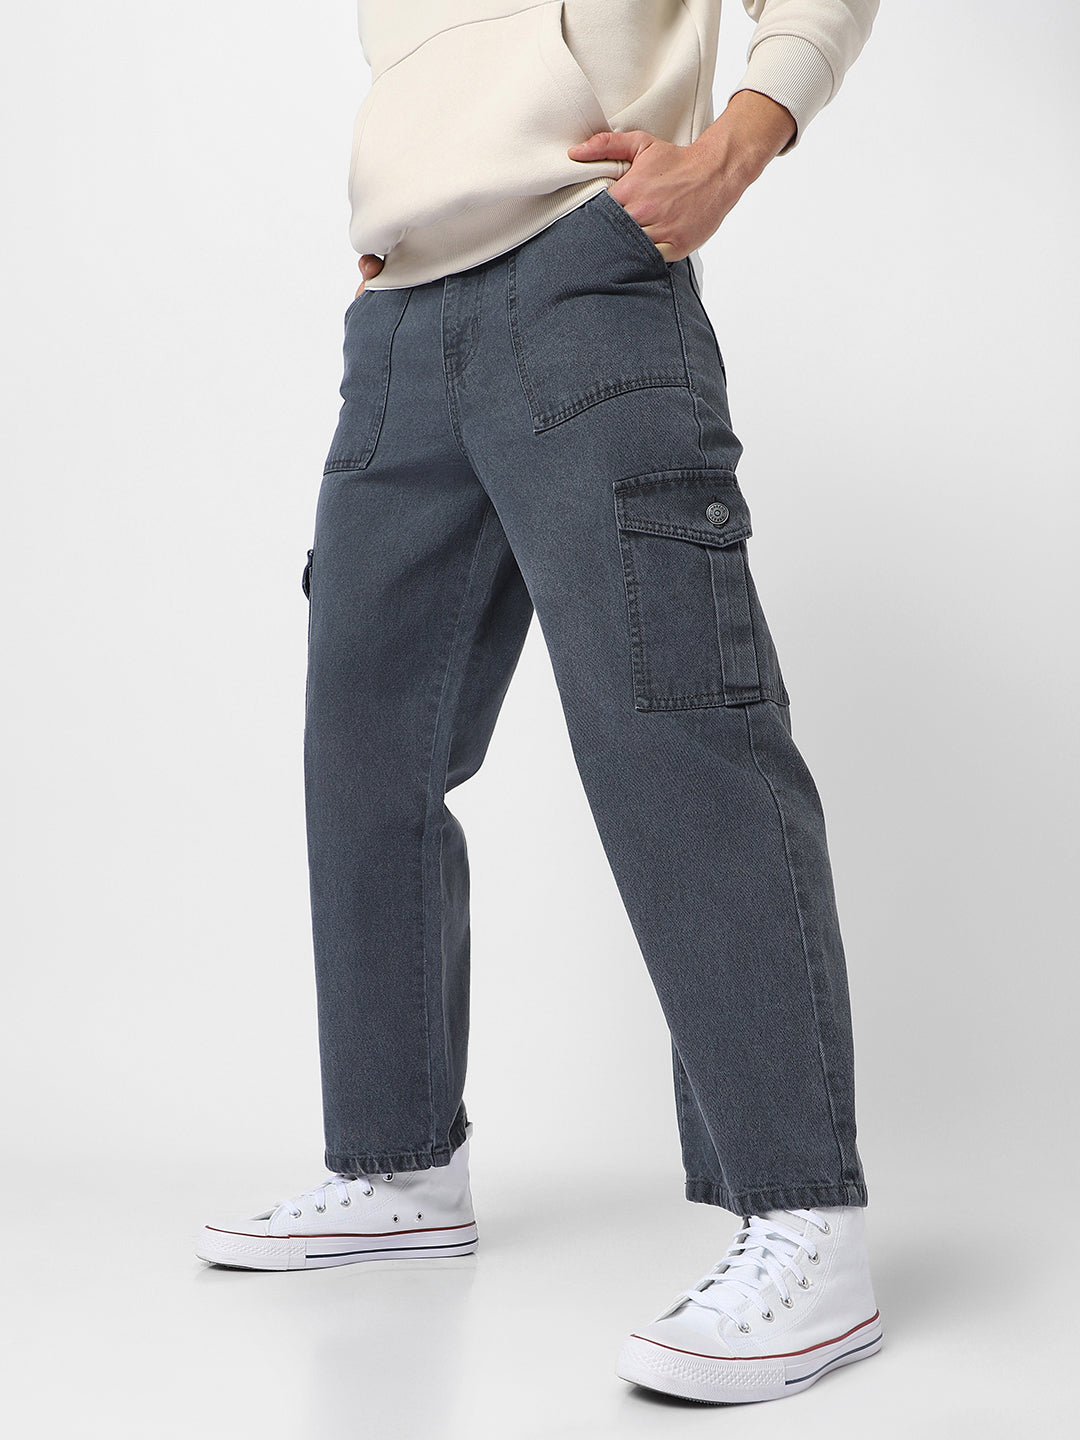 Men's Grey Loose Fit Cargo Jeans with 6 Pockets Non-Stretchable